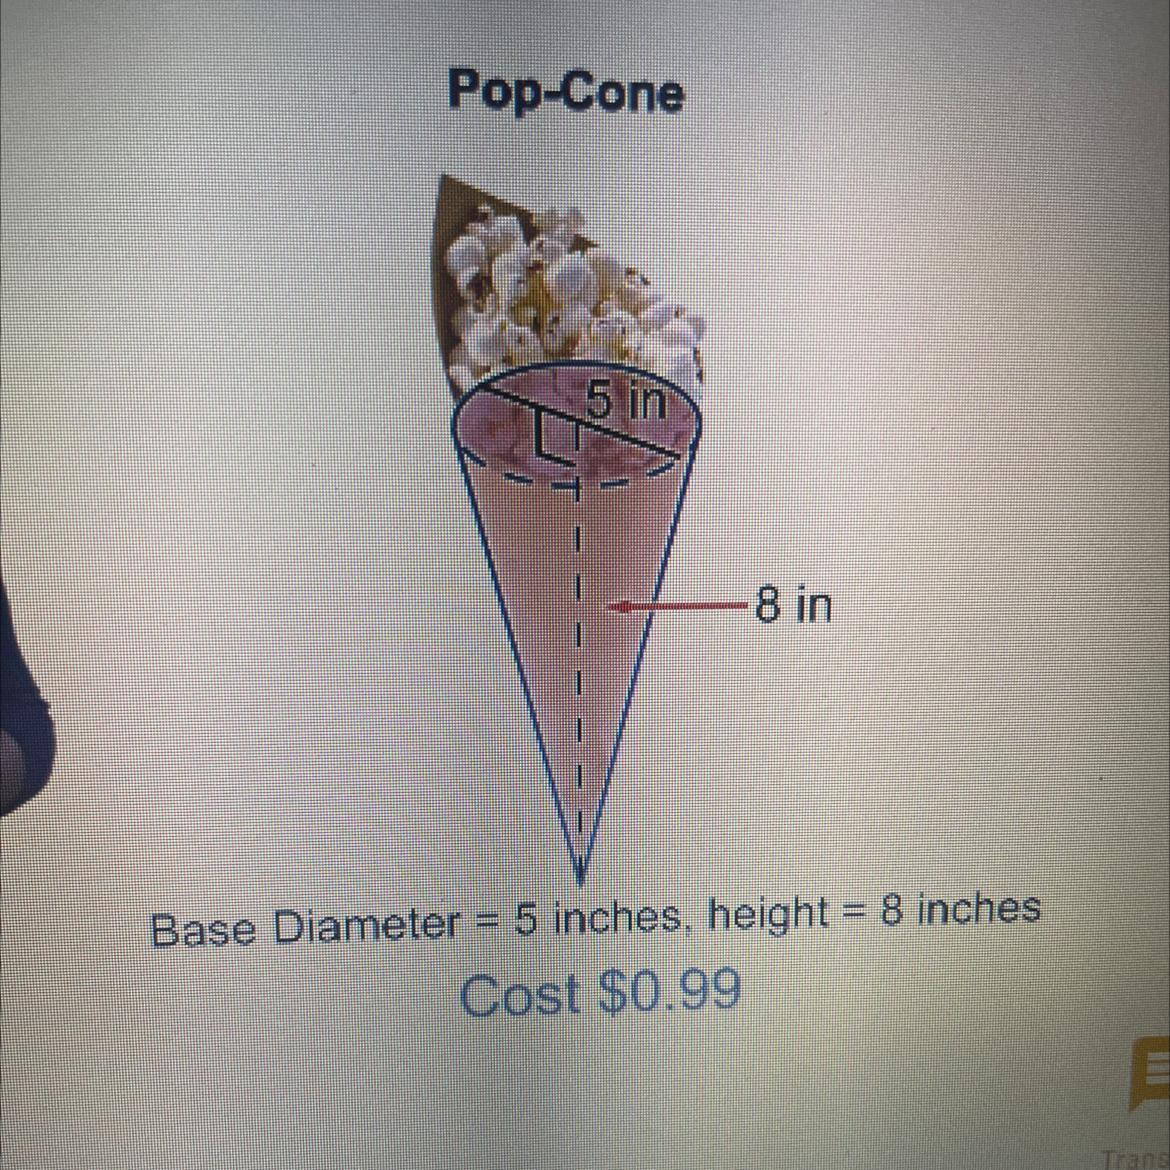 What Is The Price Per Cubic Inch For The Pop-Cone? 